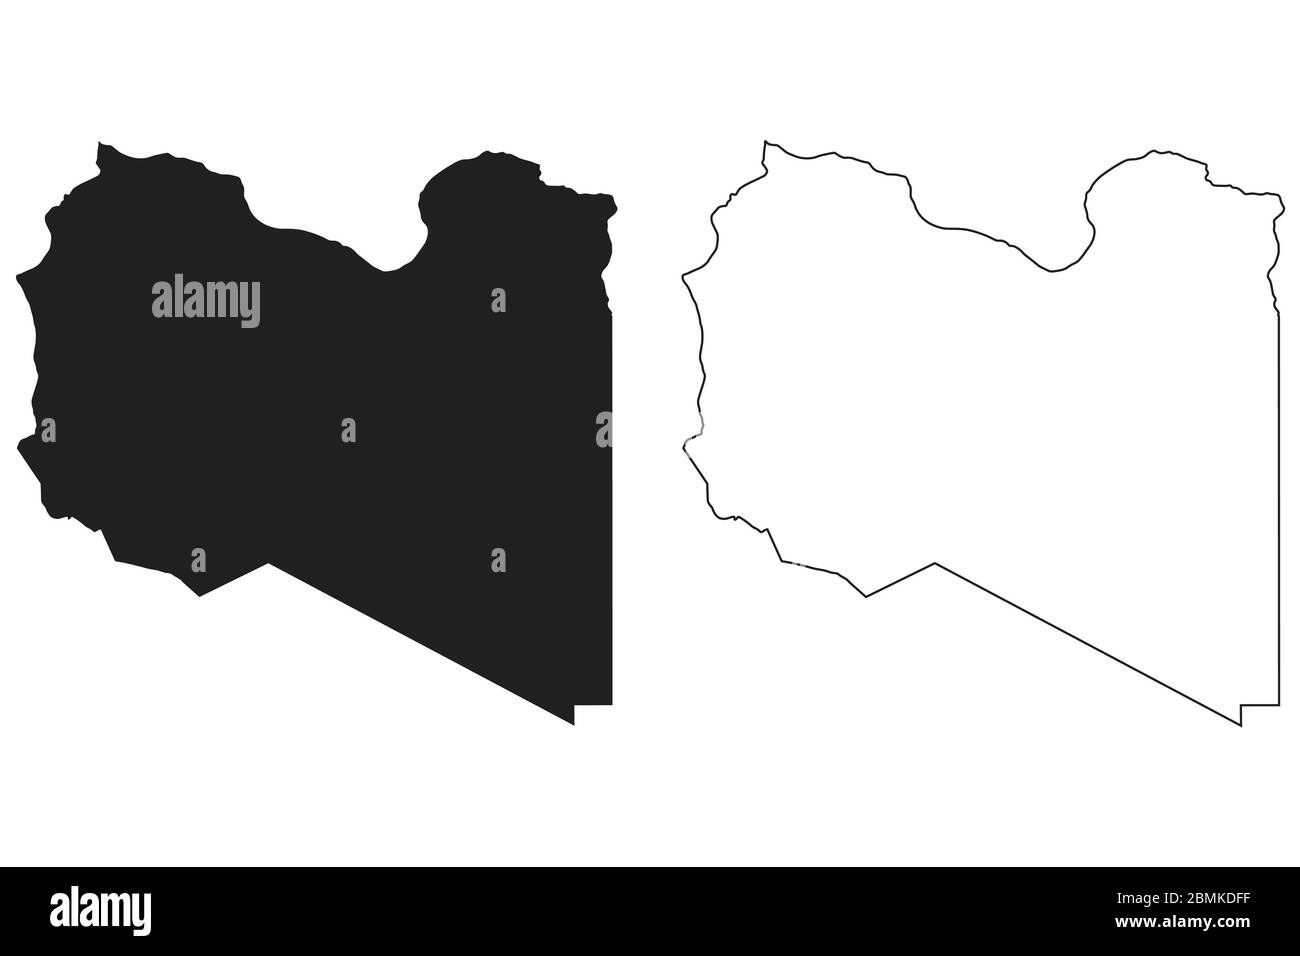 Libya Country Map. Black silhouette and outline isolated on white background. EPS Vector Stock Vector